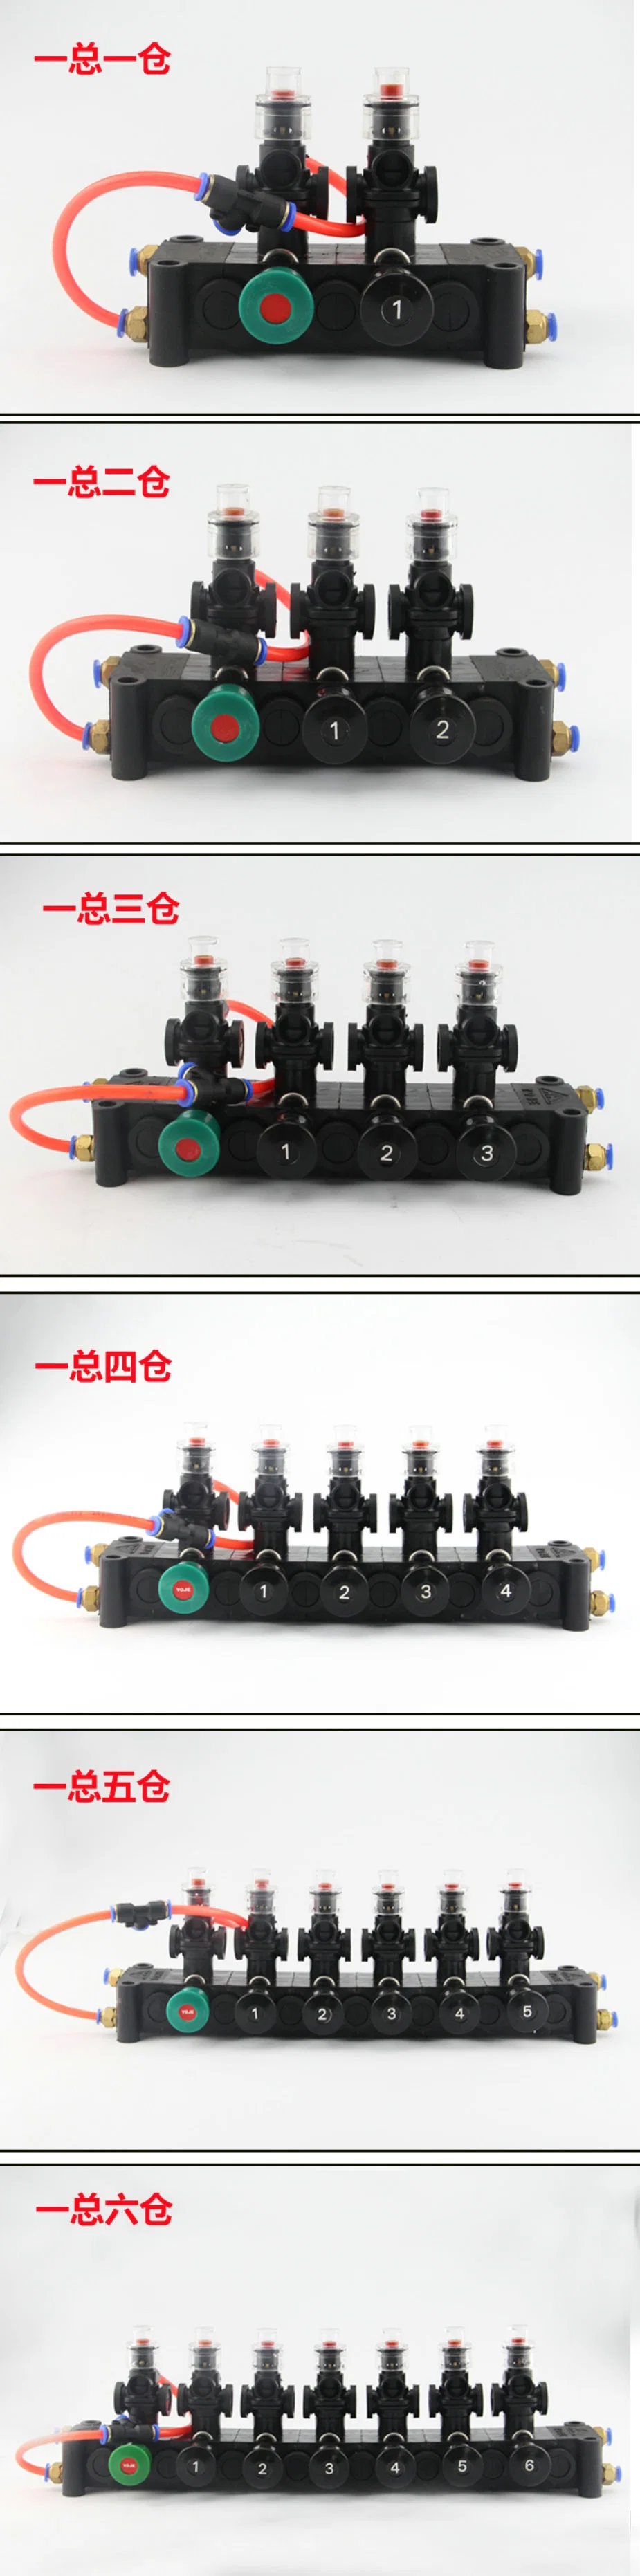 PVC Pneumatic Switch Block for Fuel Tanker 3 Compartments (Plastic Pneumatic Plastic Control Block)